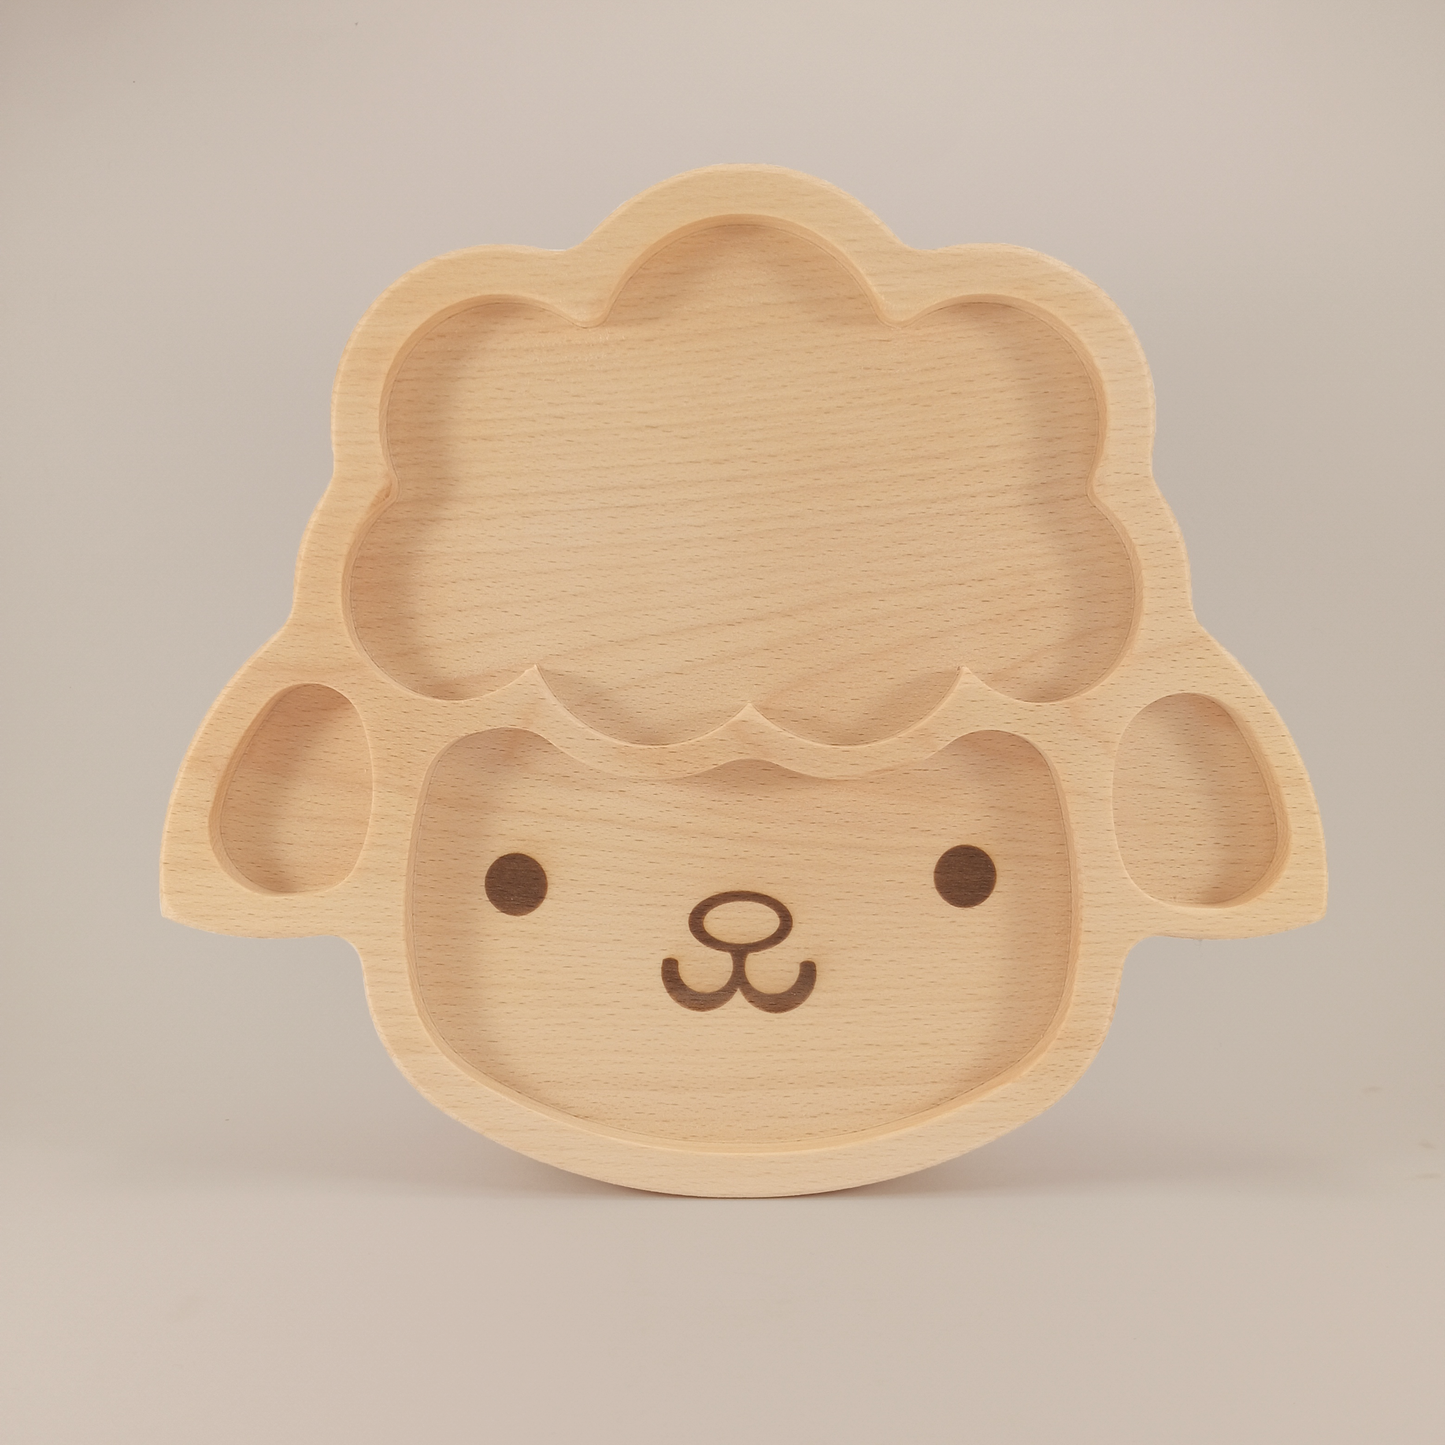 Lamb shaped wooden plate to BLW feeding